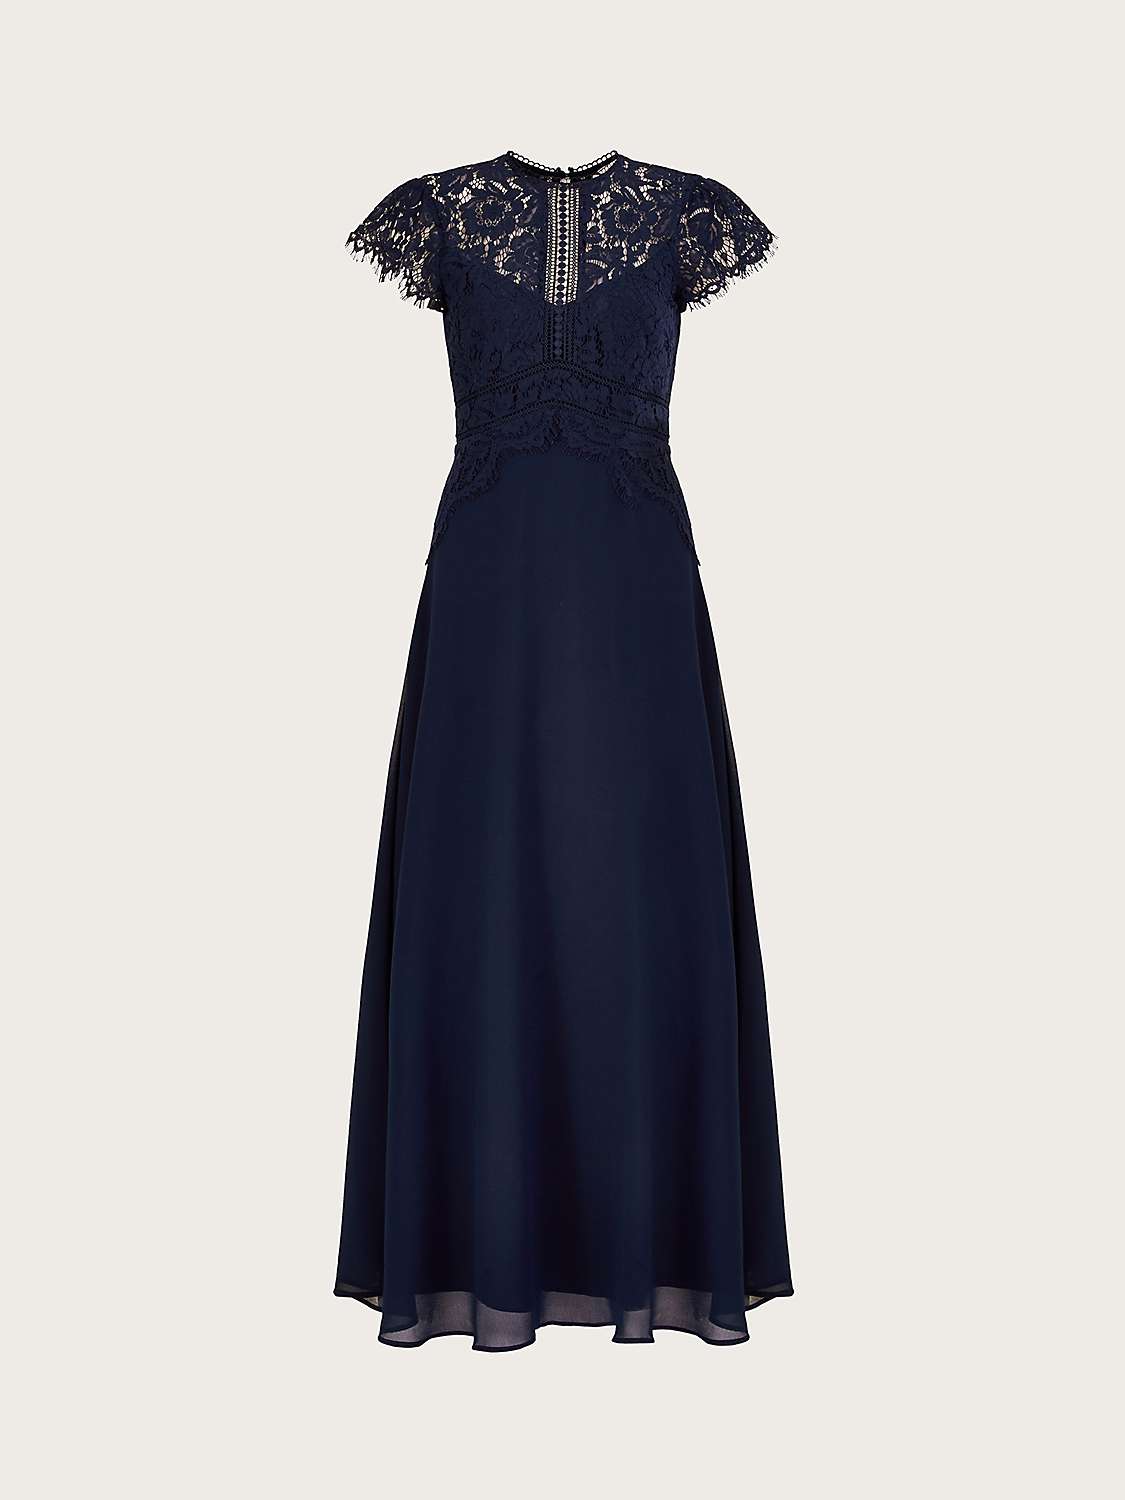 Buy Monsoon Louise Lace Bodice Maxi Dress, Navy Online at johnlewis.com